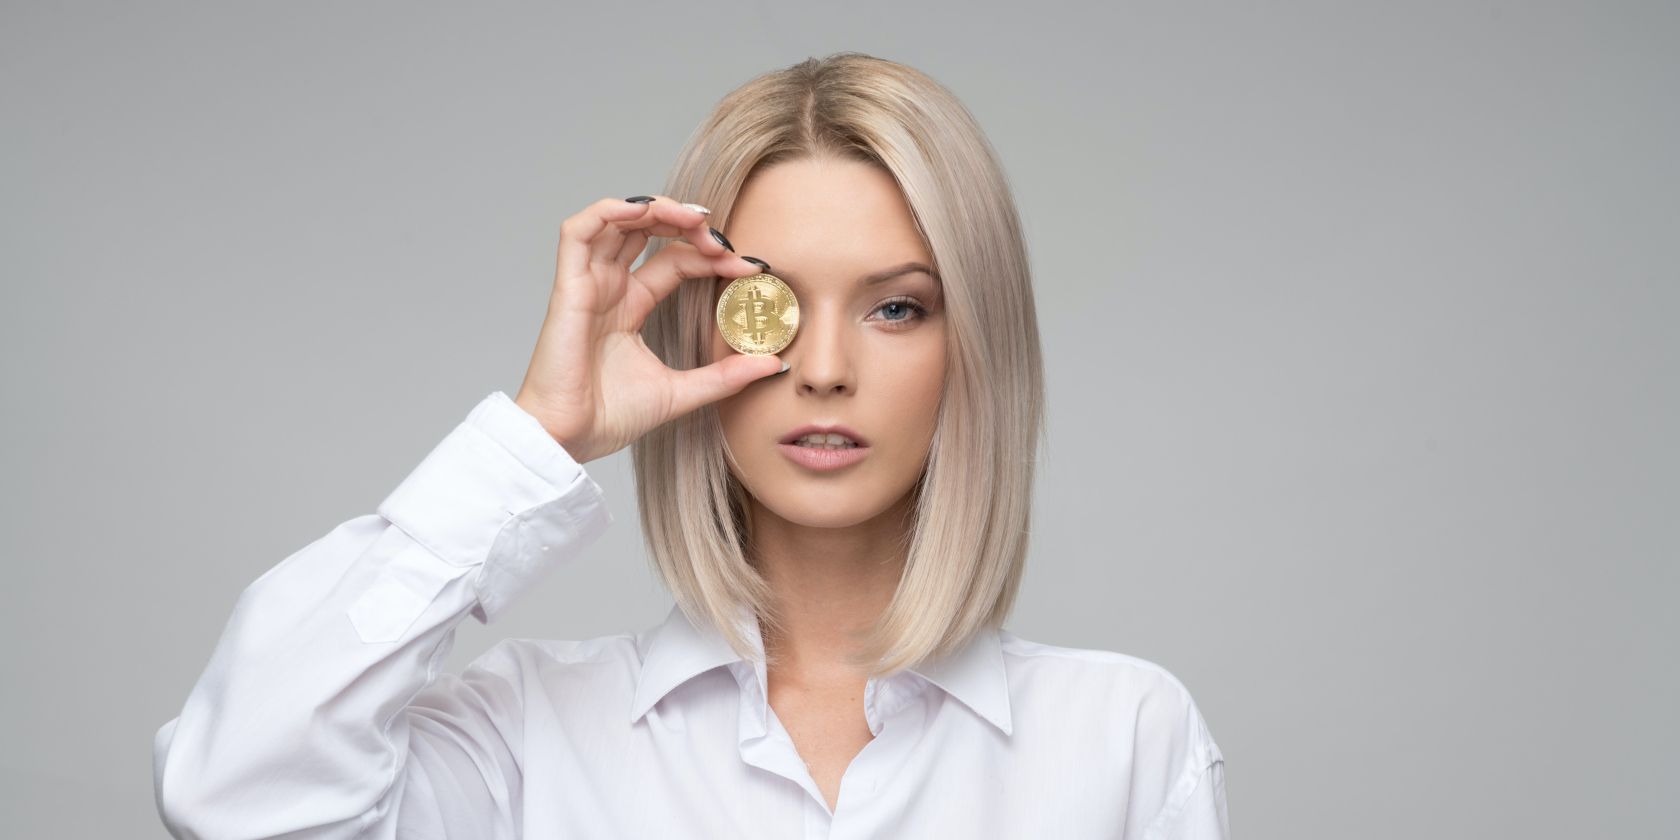 Woman Holding a Bitcoin Up to Her Eye